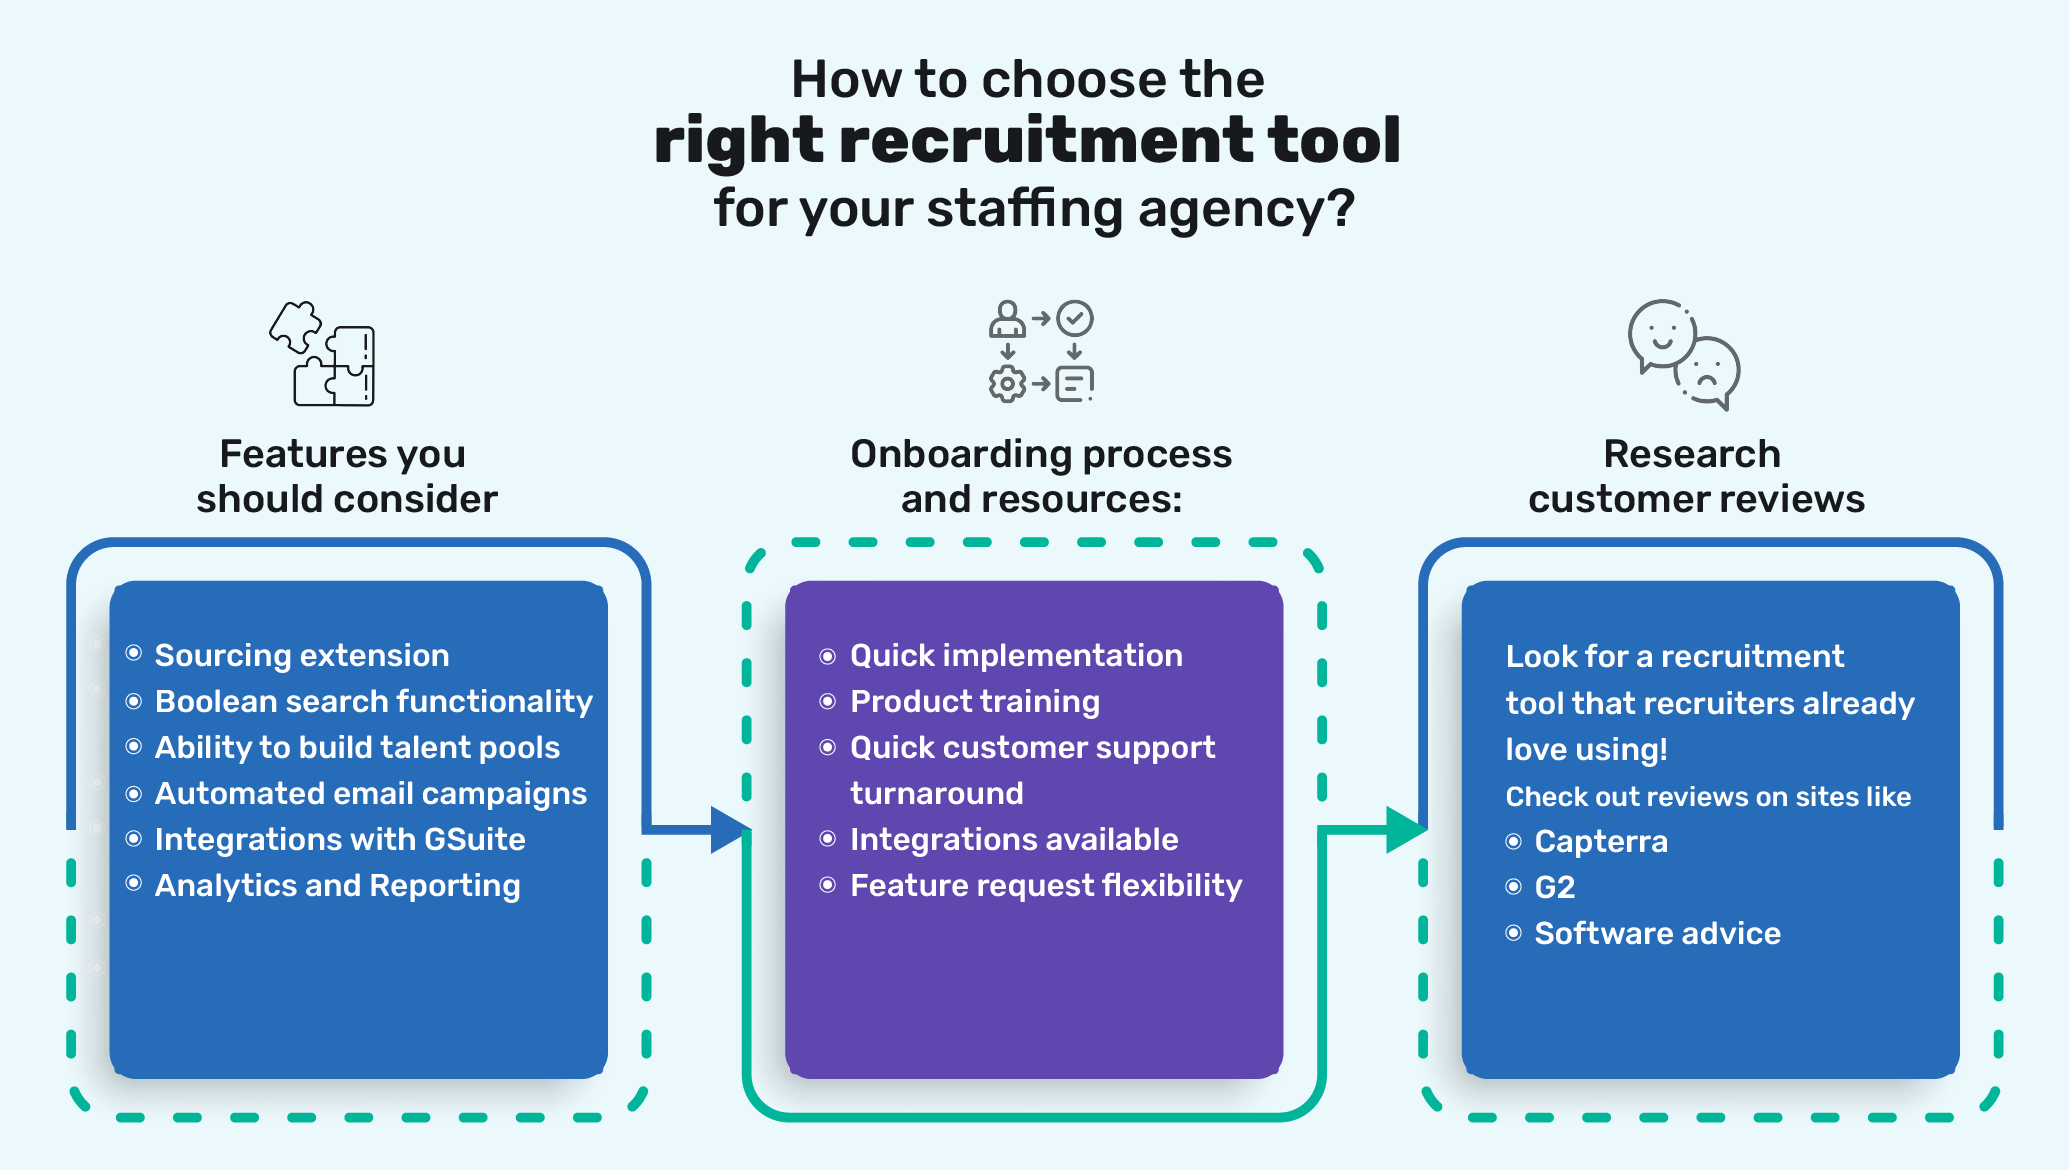 How To Choose The Right Recruitment Tool For Your Staffing Agency